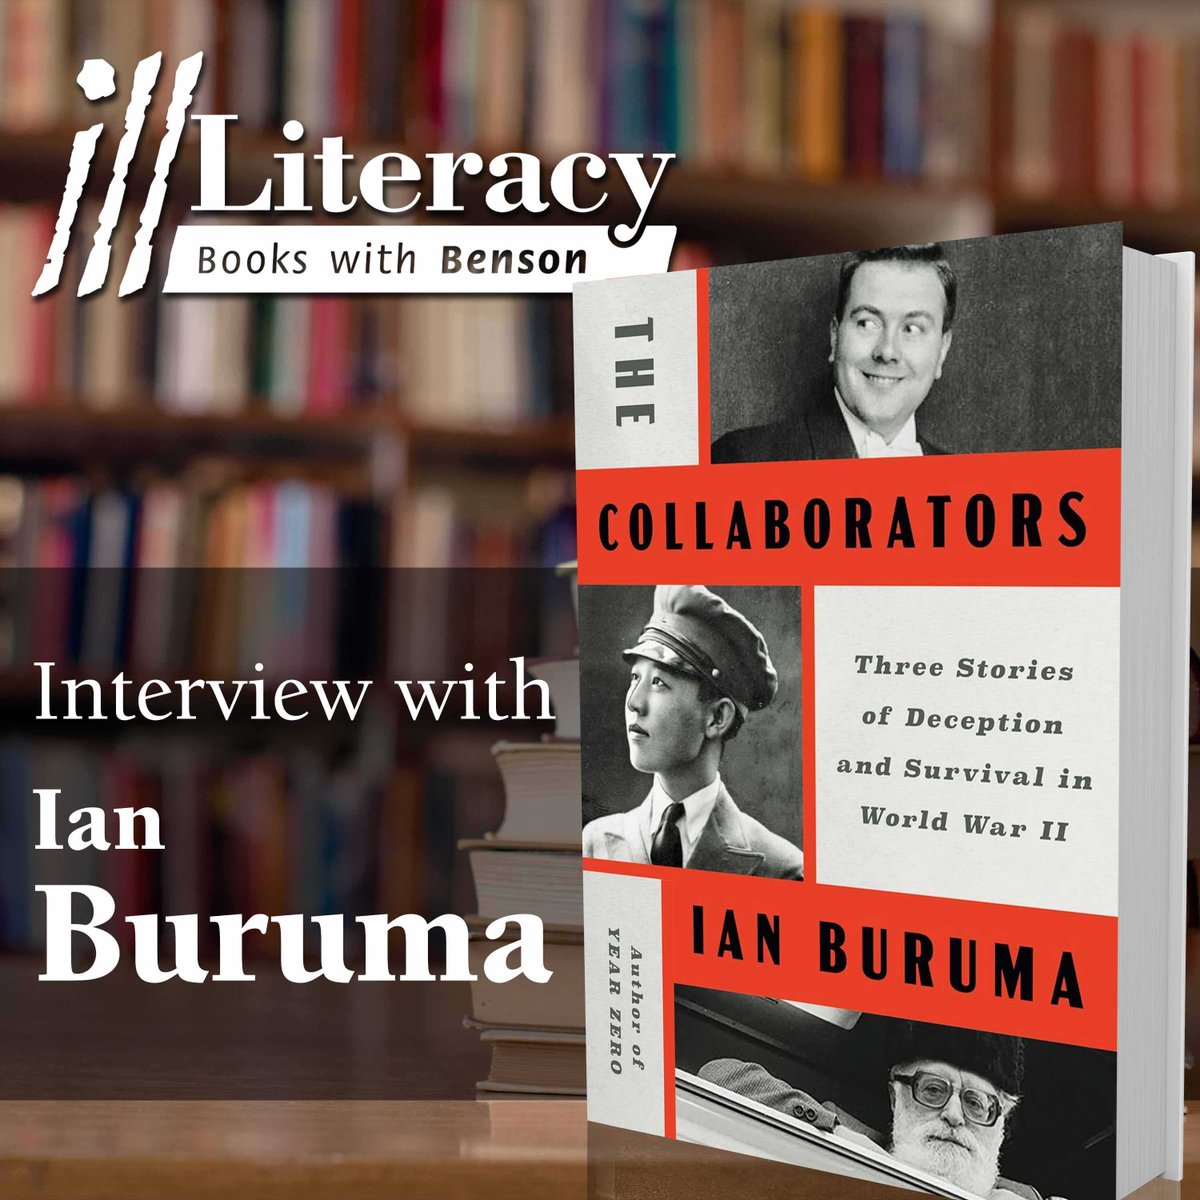 Episode 140 is here, featuring Ian Buruma of @BardCollege discussing 'The Collaborators: Three Stories of Deception and Survival in World War II' from @penguinrandom. (There's also a little discussion of his new bio of Spinoza in the @jewishlives series.) heartland.org/podcasts/ill-l…